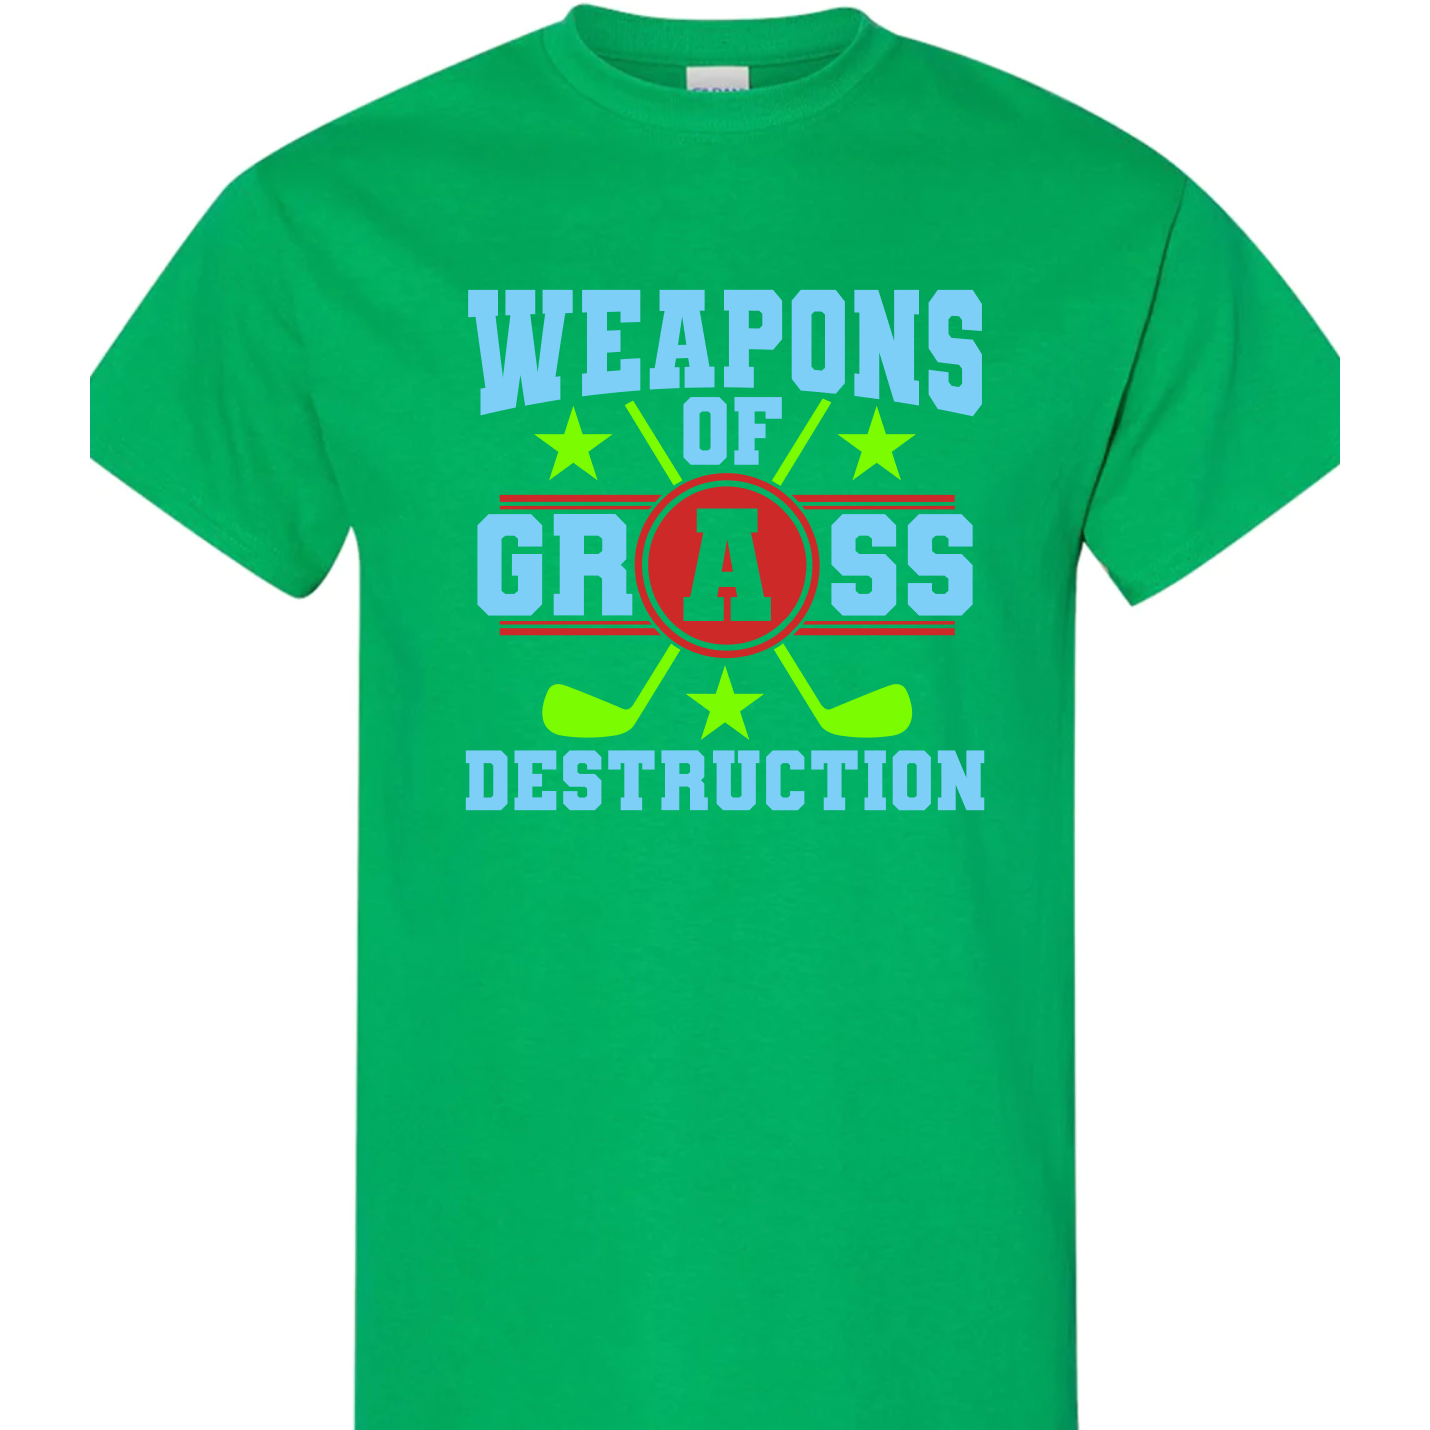 Weapons of Grass Destruction Vinyl Graphic for Shirts